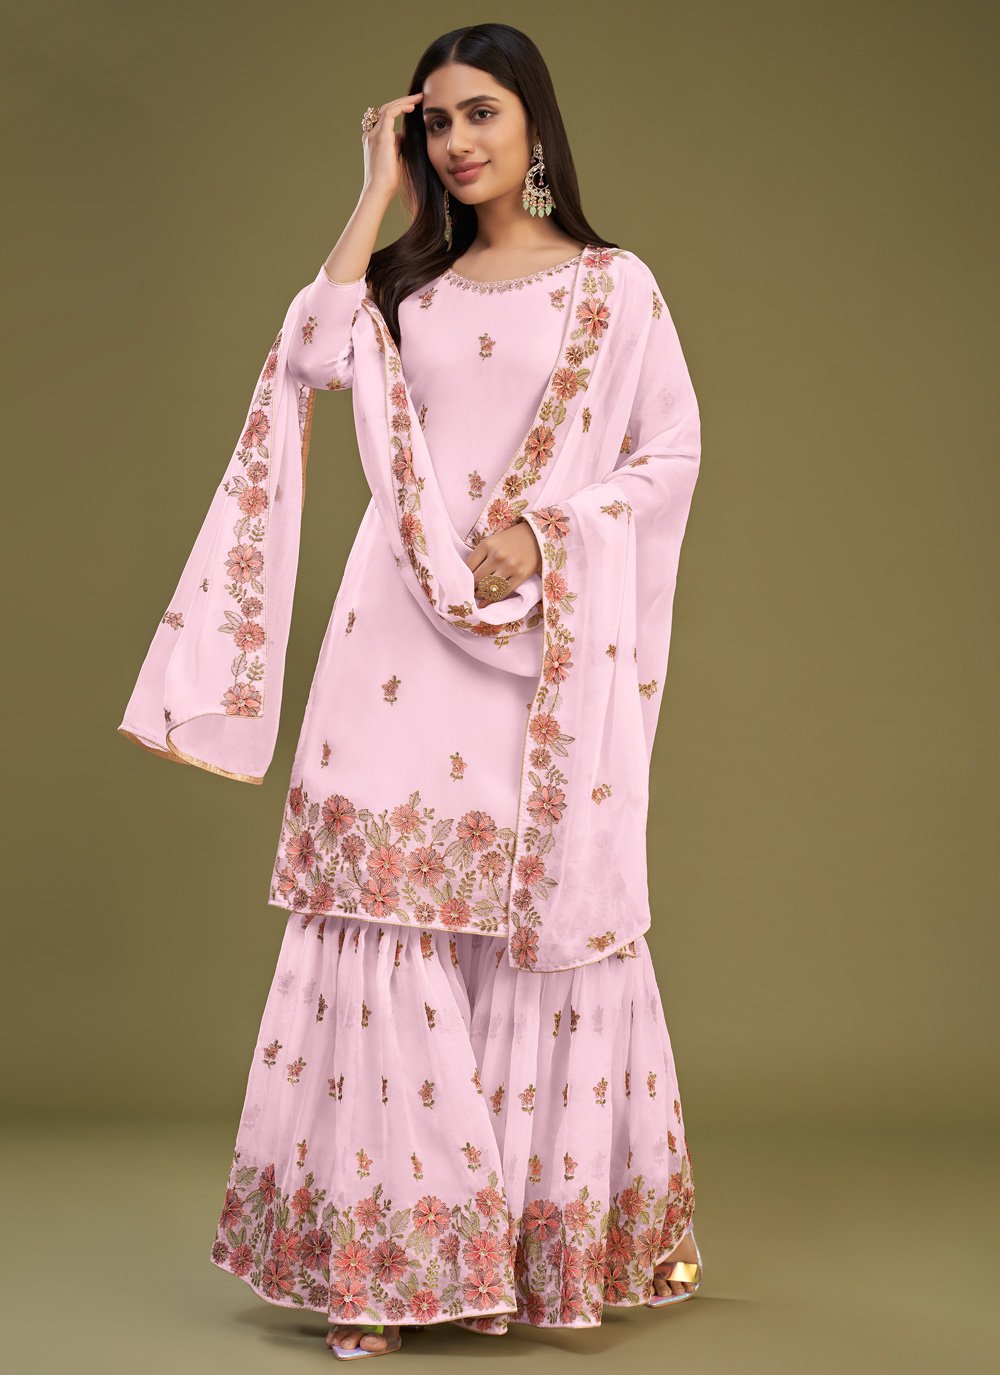 Designer Salwar Suits: A Fusion of Tradition and Modernity